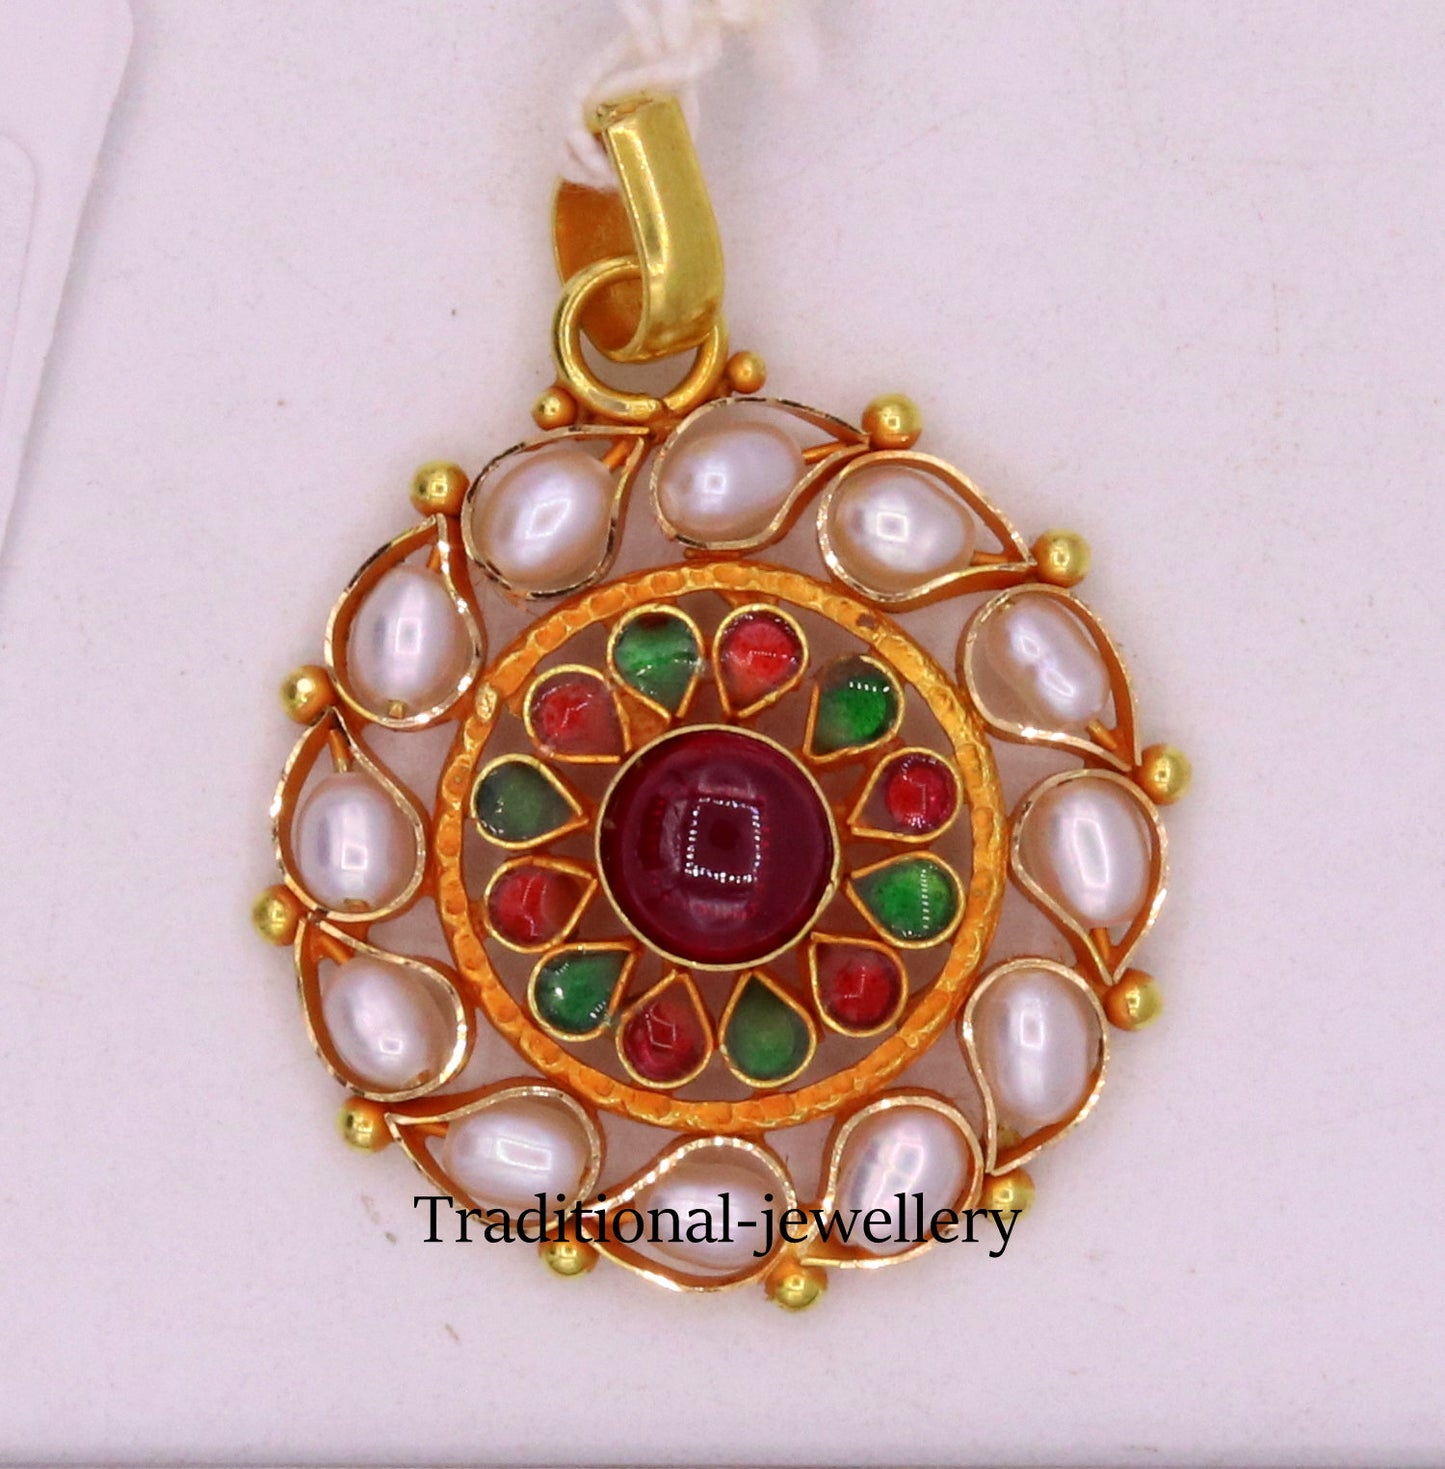 22 karat yellow gold vintage antique style handmade pendant with fabulous pearl and red color stone from tribal Rajasthan india - TRIBAL ORNAMENTS